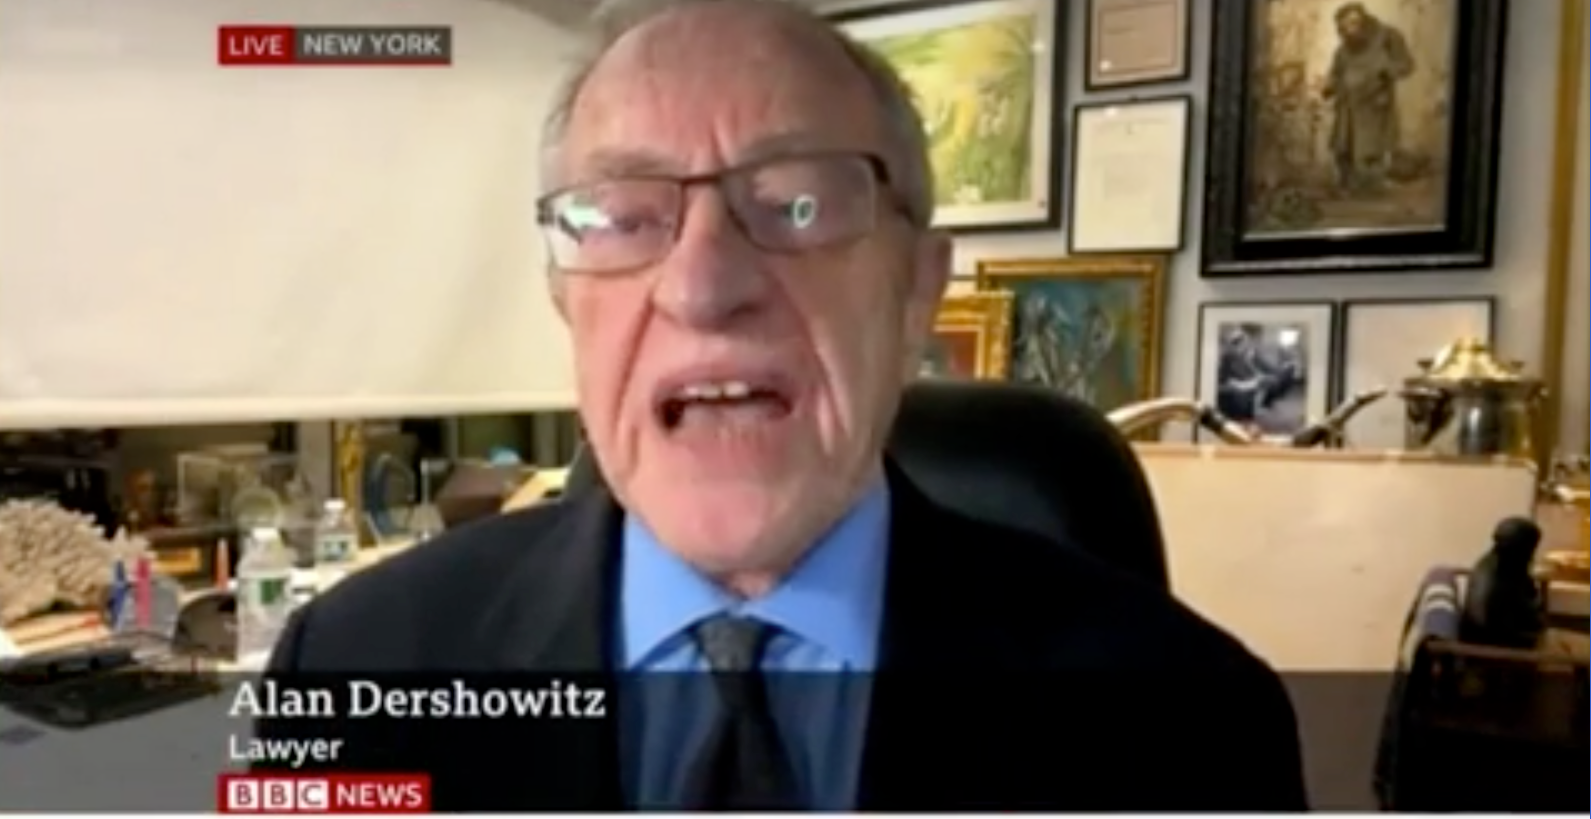 Alan Dershowitz’s links to Epstein were not mentioned during his interview on the BBC